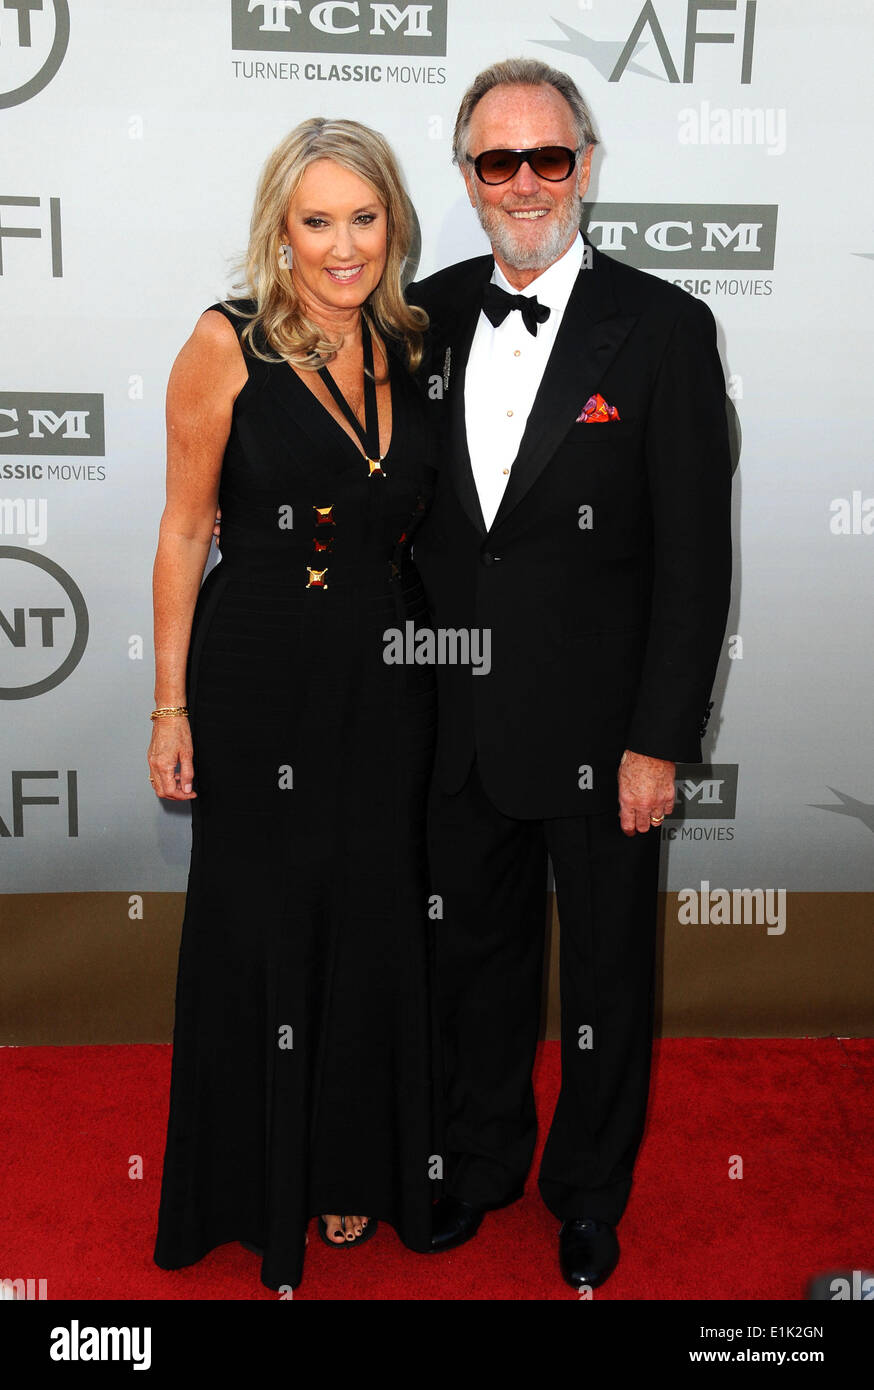 Los Angeles, California, USA. 5th June, 2014. Peter Fonda attending the AFI Life Achievement Award: A Tribute To Jane Fonda held at the Dolby Theatre in Hollywood, California on June 5, 2014. 201 Credit:  D. Long/Globe Photos/ZUMAPRESS.com/Alamy Live News Stock Photo